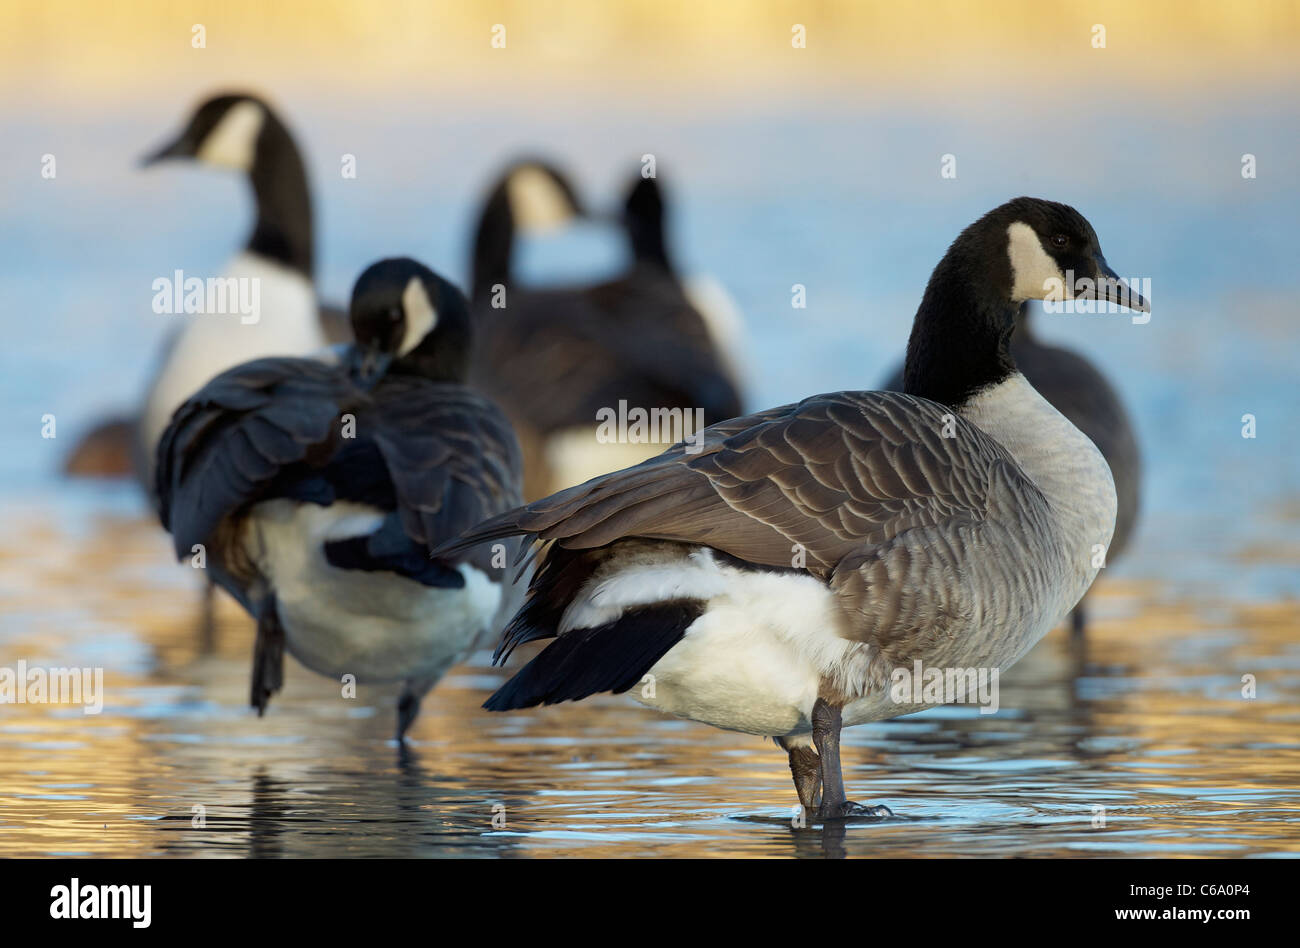 Canada Goose (Branta canadensis), group standing in shallow water. Stock Photo